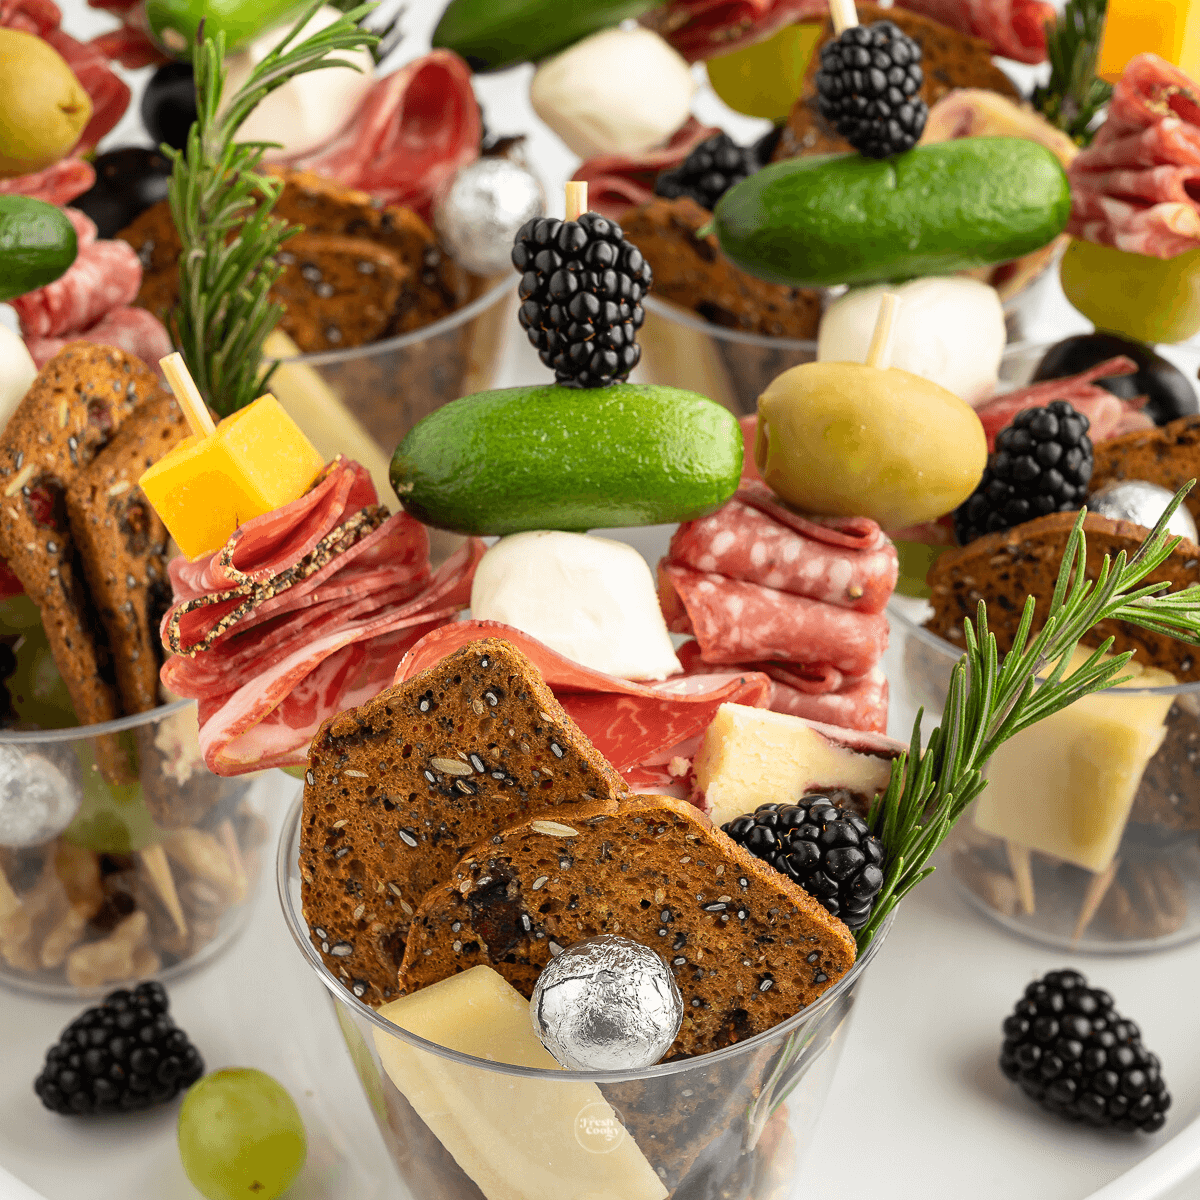 Multiple charcuterie cups loaded with cured meats, cheese, chocolates, fruit and veggies.